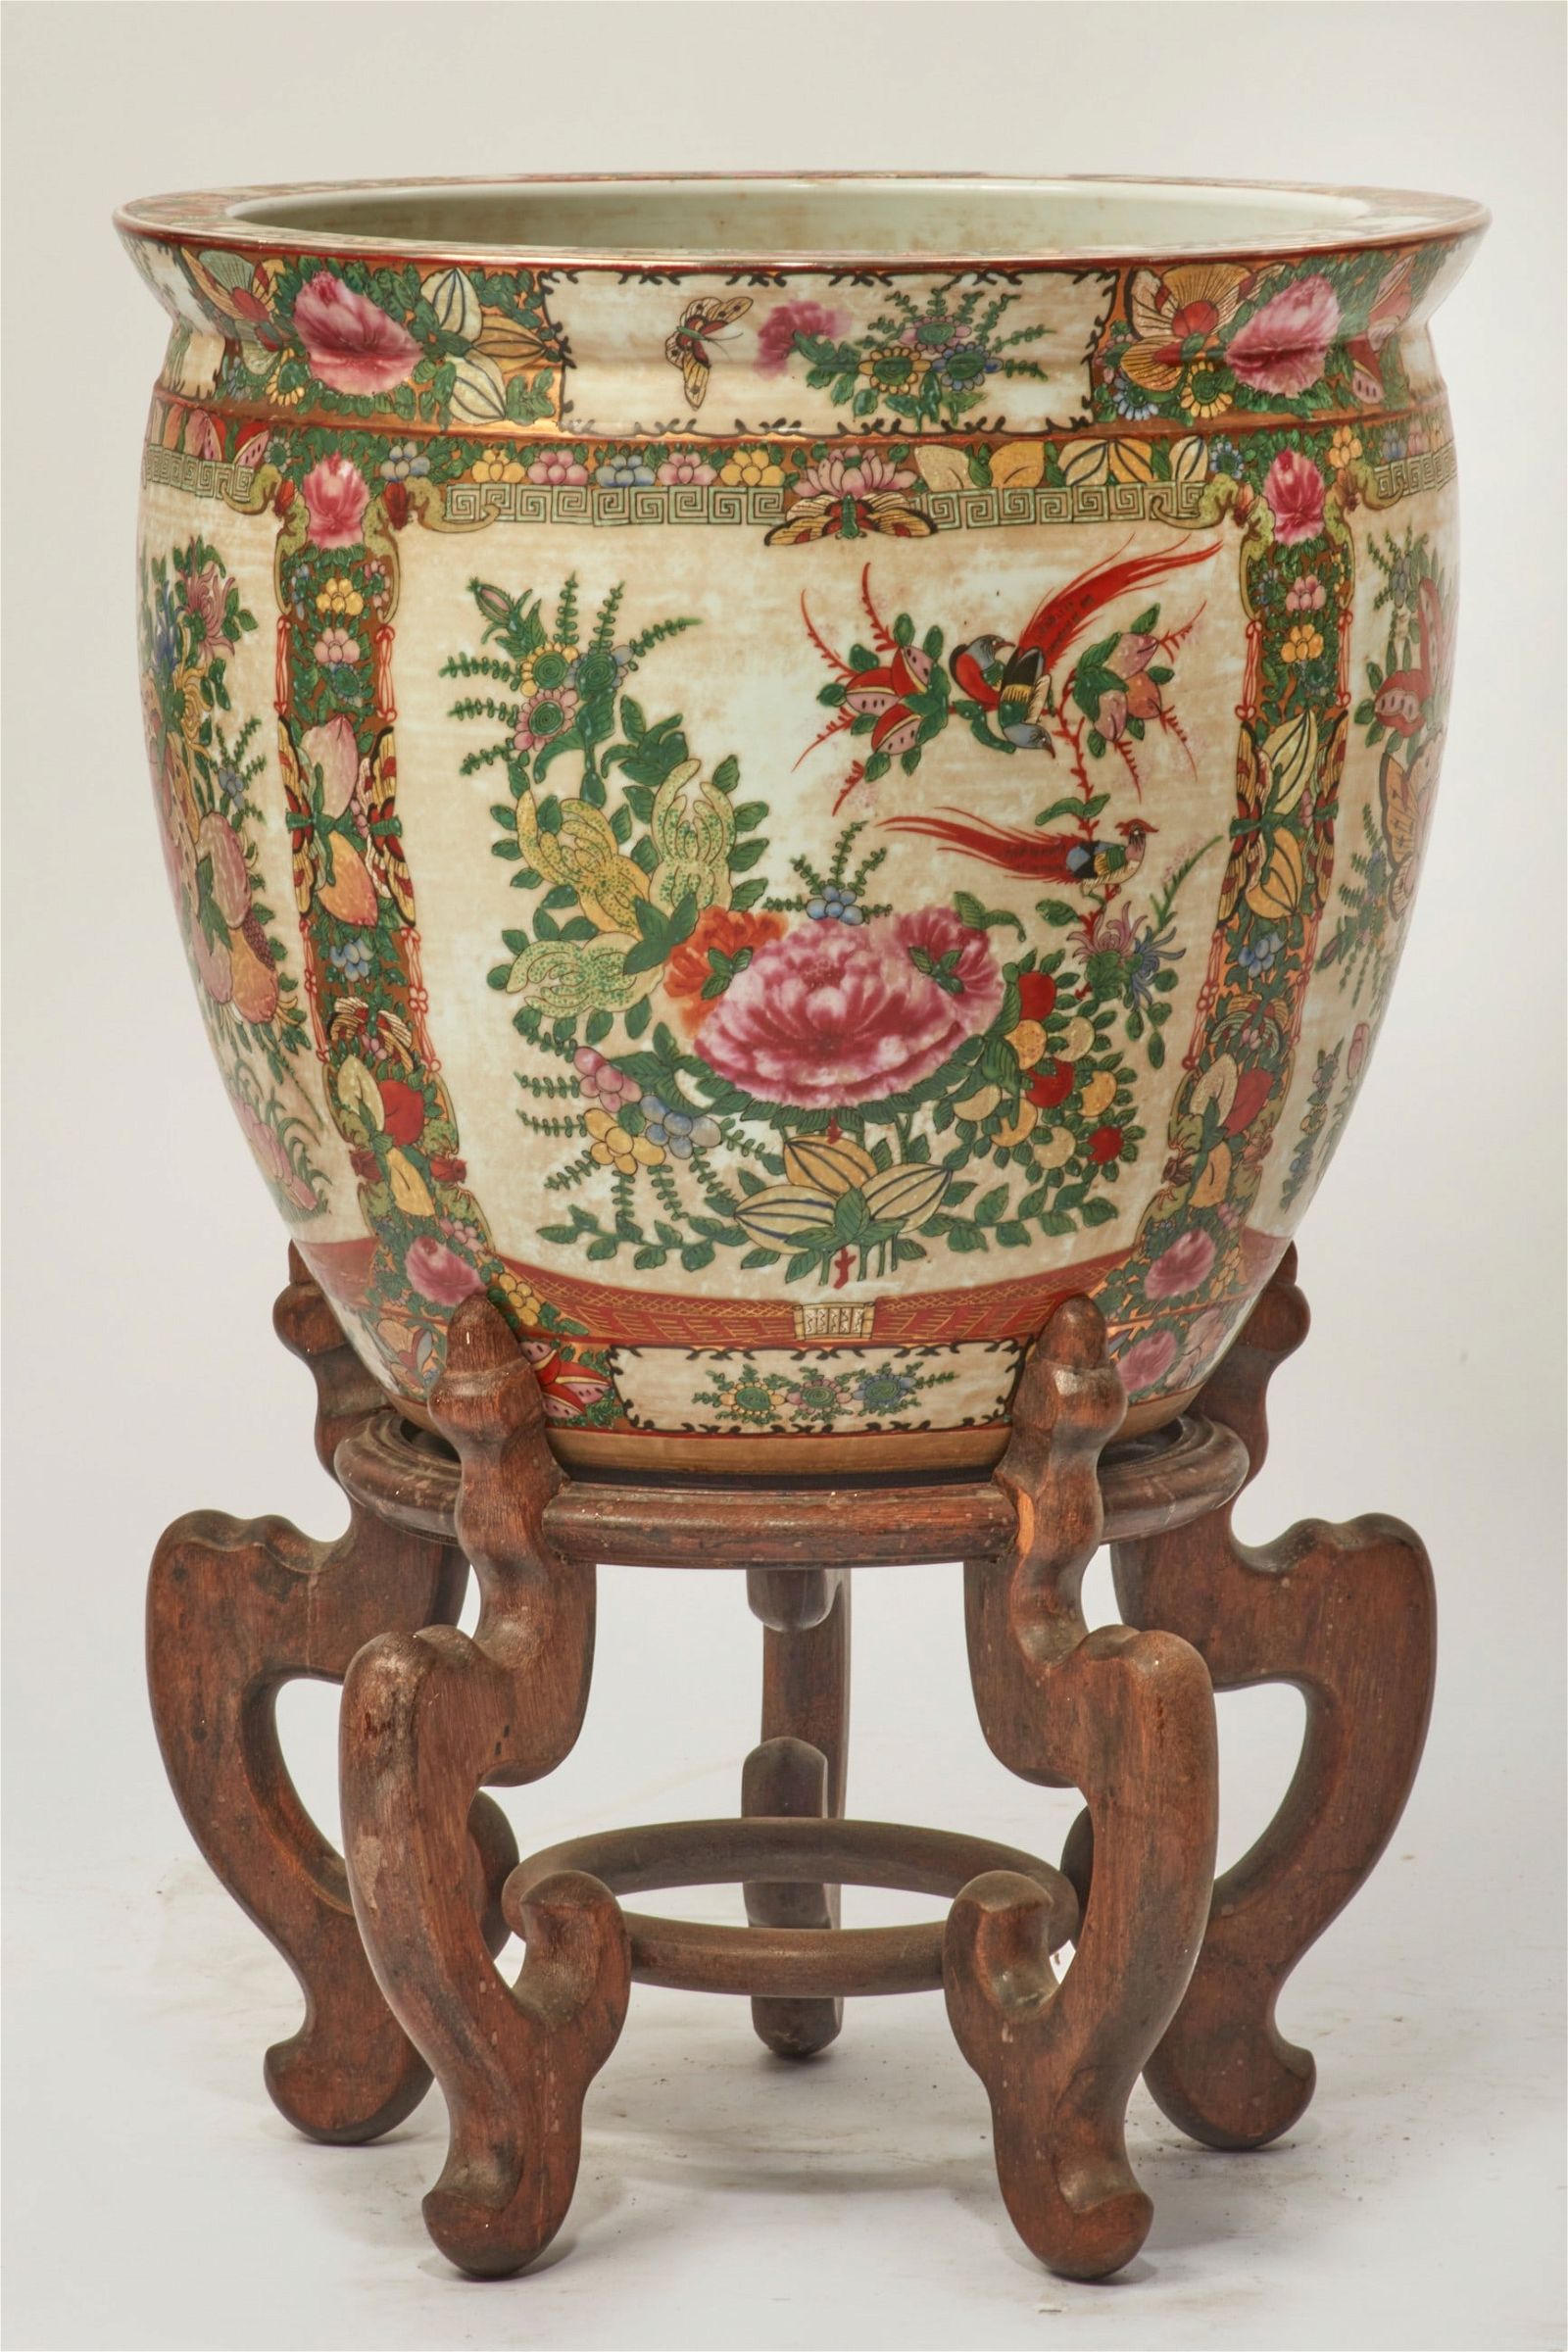 A CHINESE EXPORT PORCELAIN JARDINIERE 2fb2d66